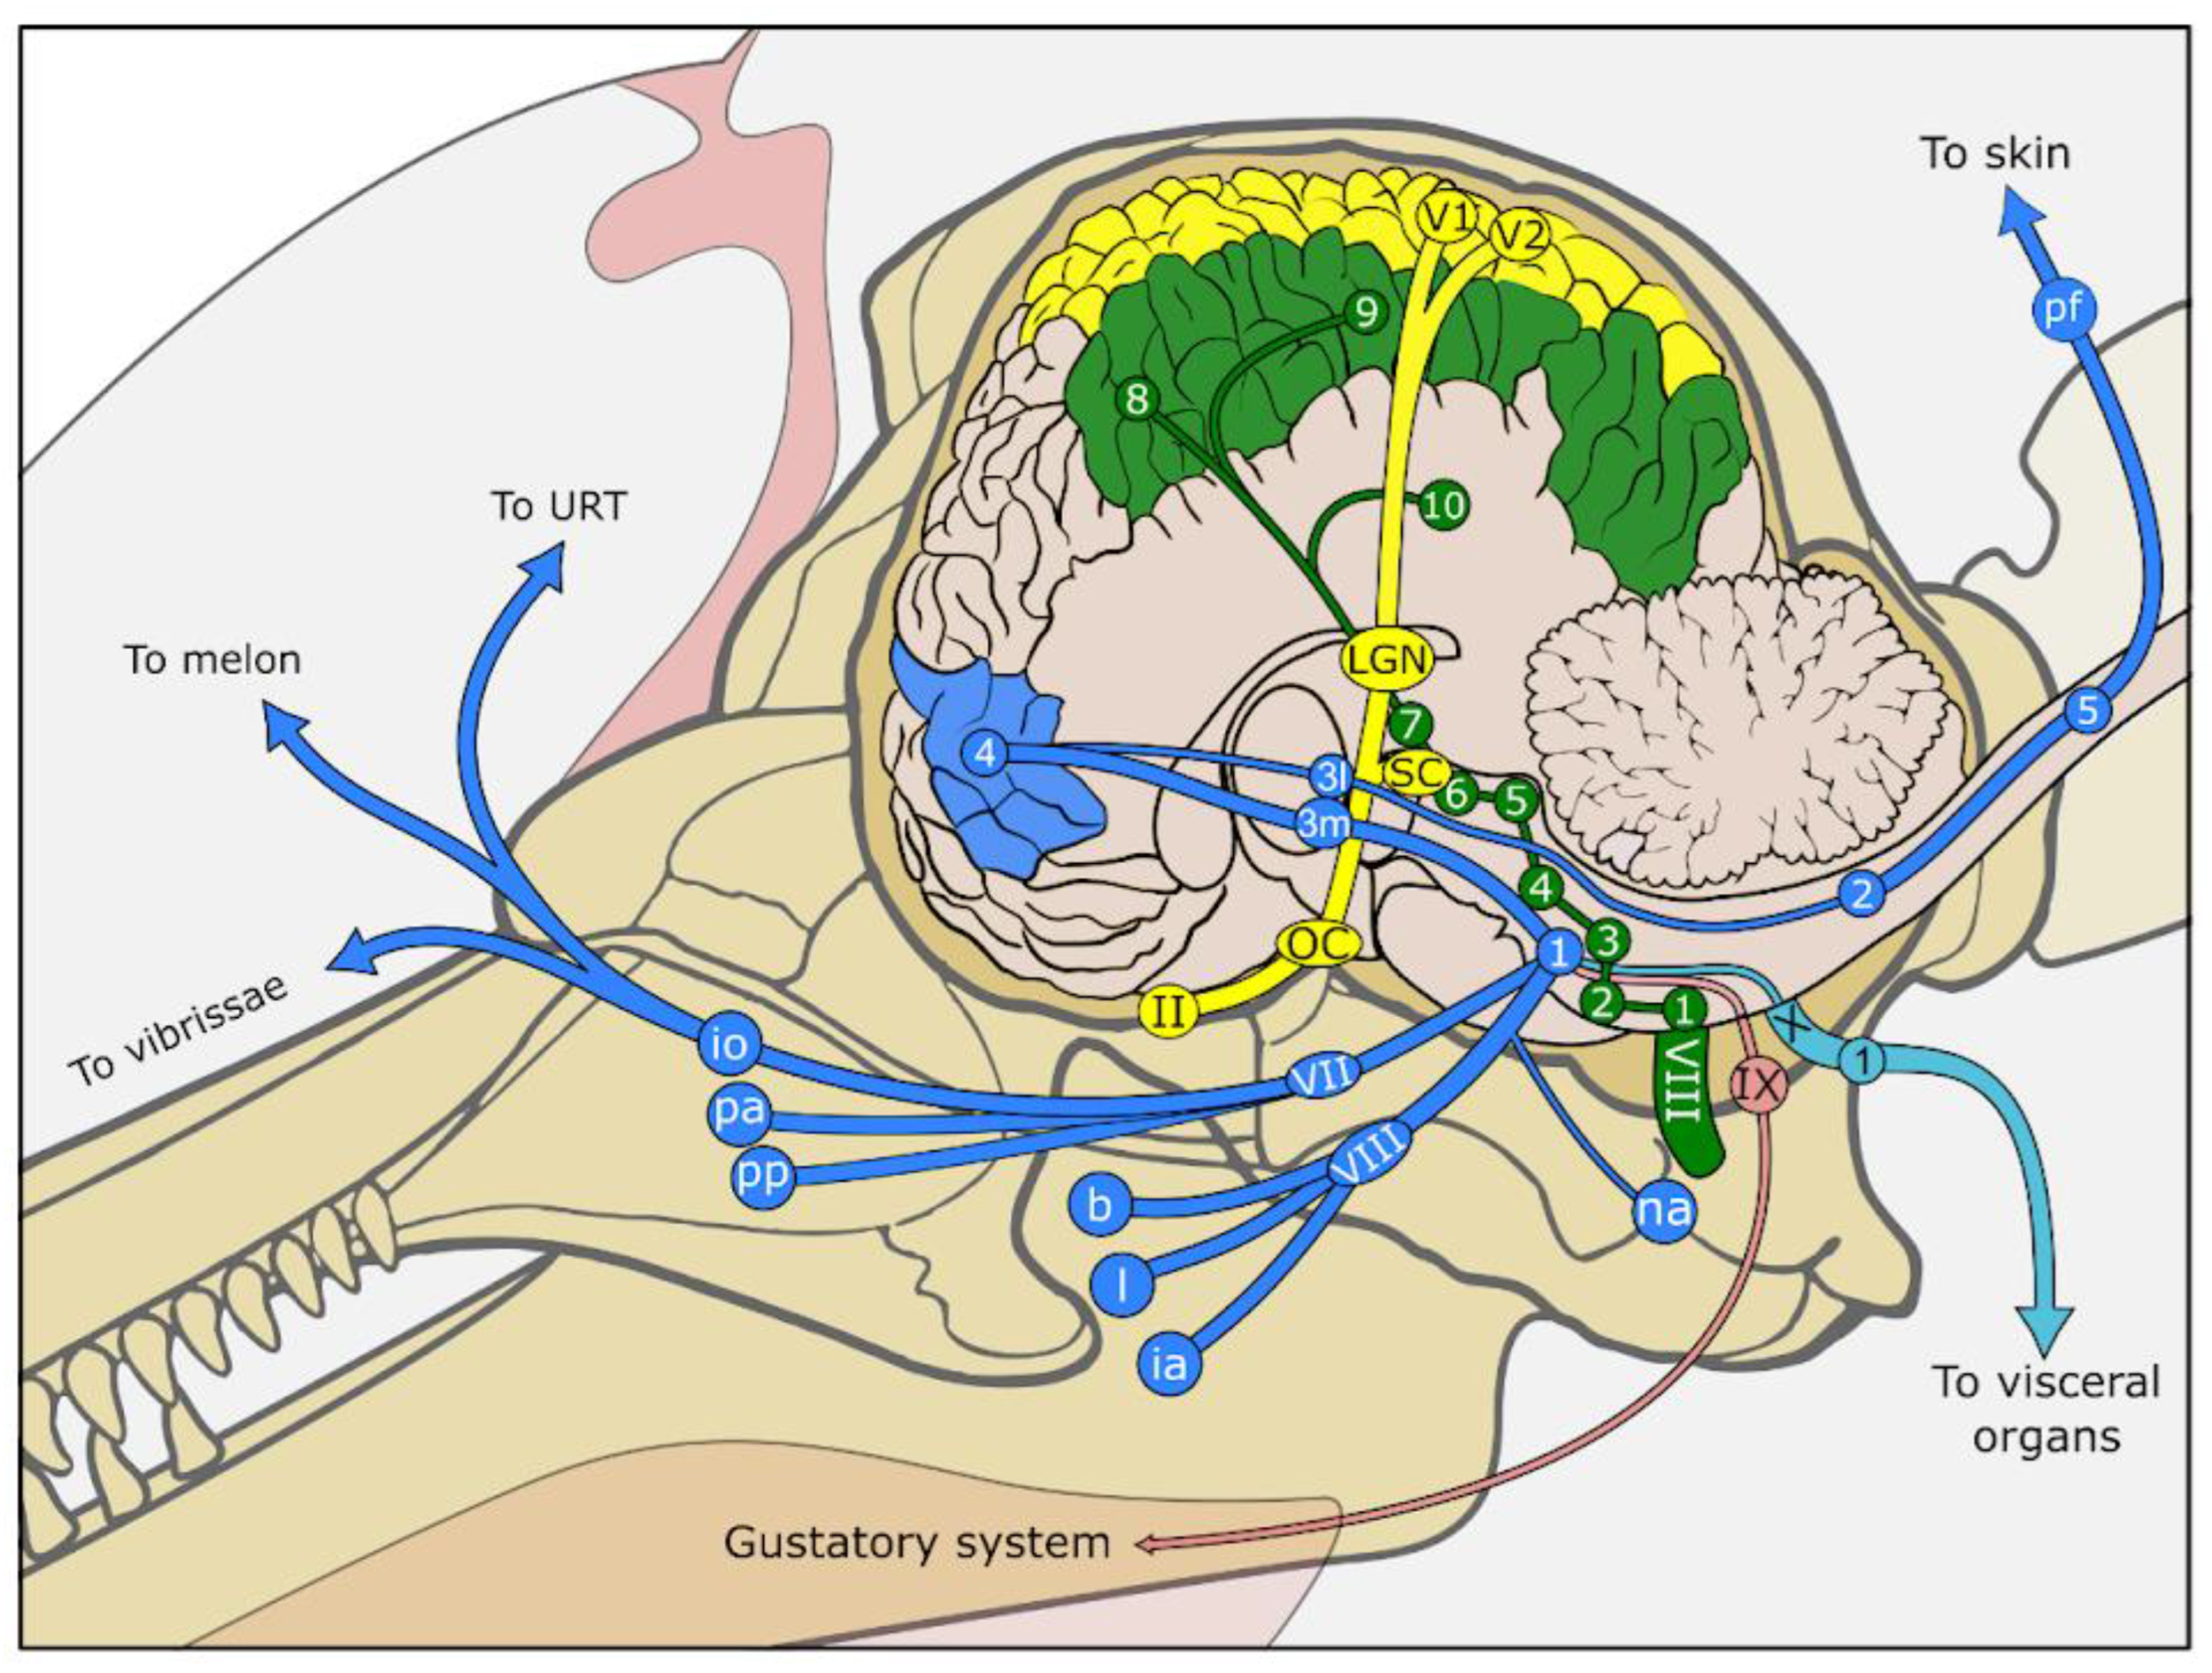 The functional anatomy of elephant trunk whiskers